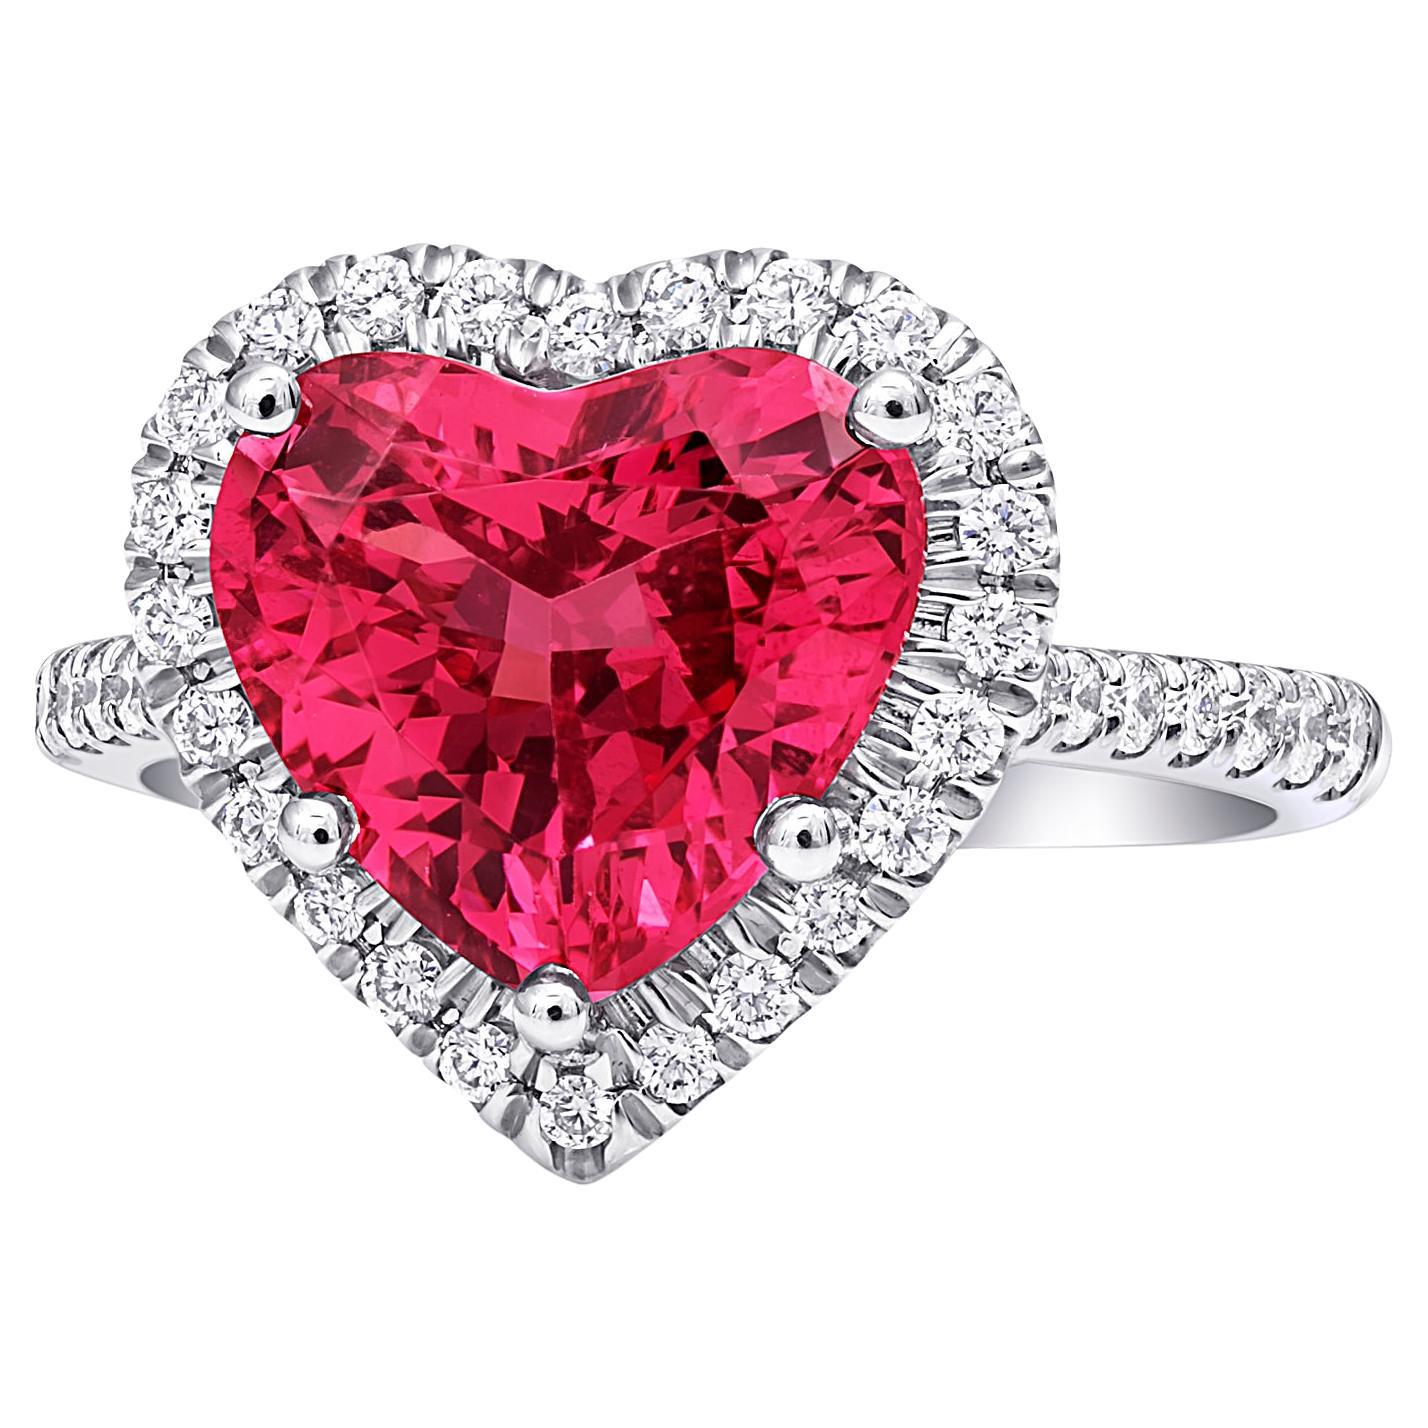 GRS Certified 3.90 Carats Mahenge Pink Spinel Diamonds set in Platinum Ring For Sale